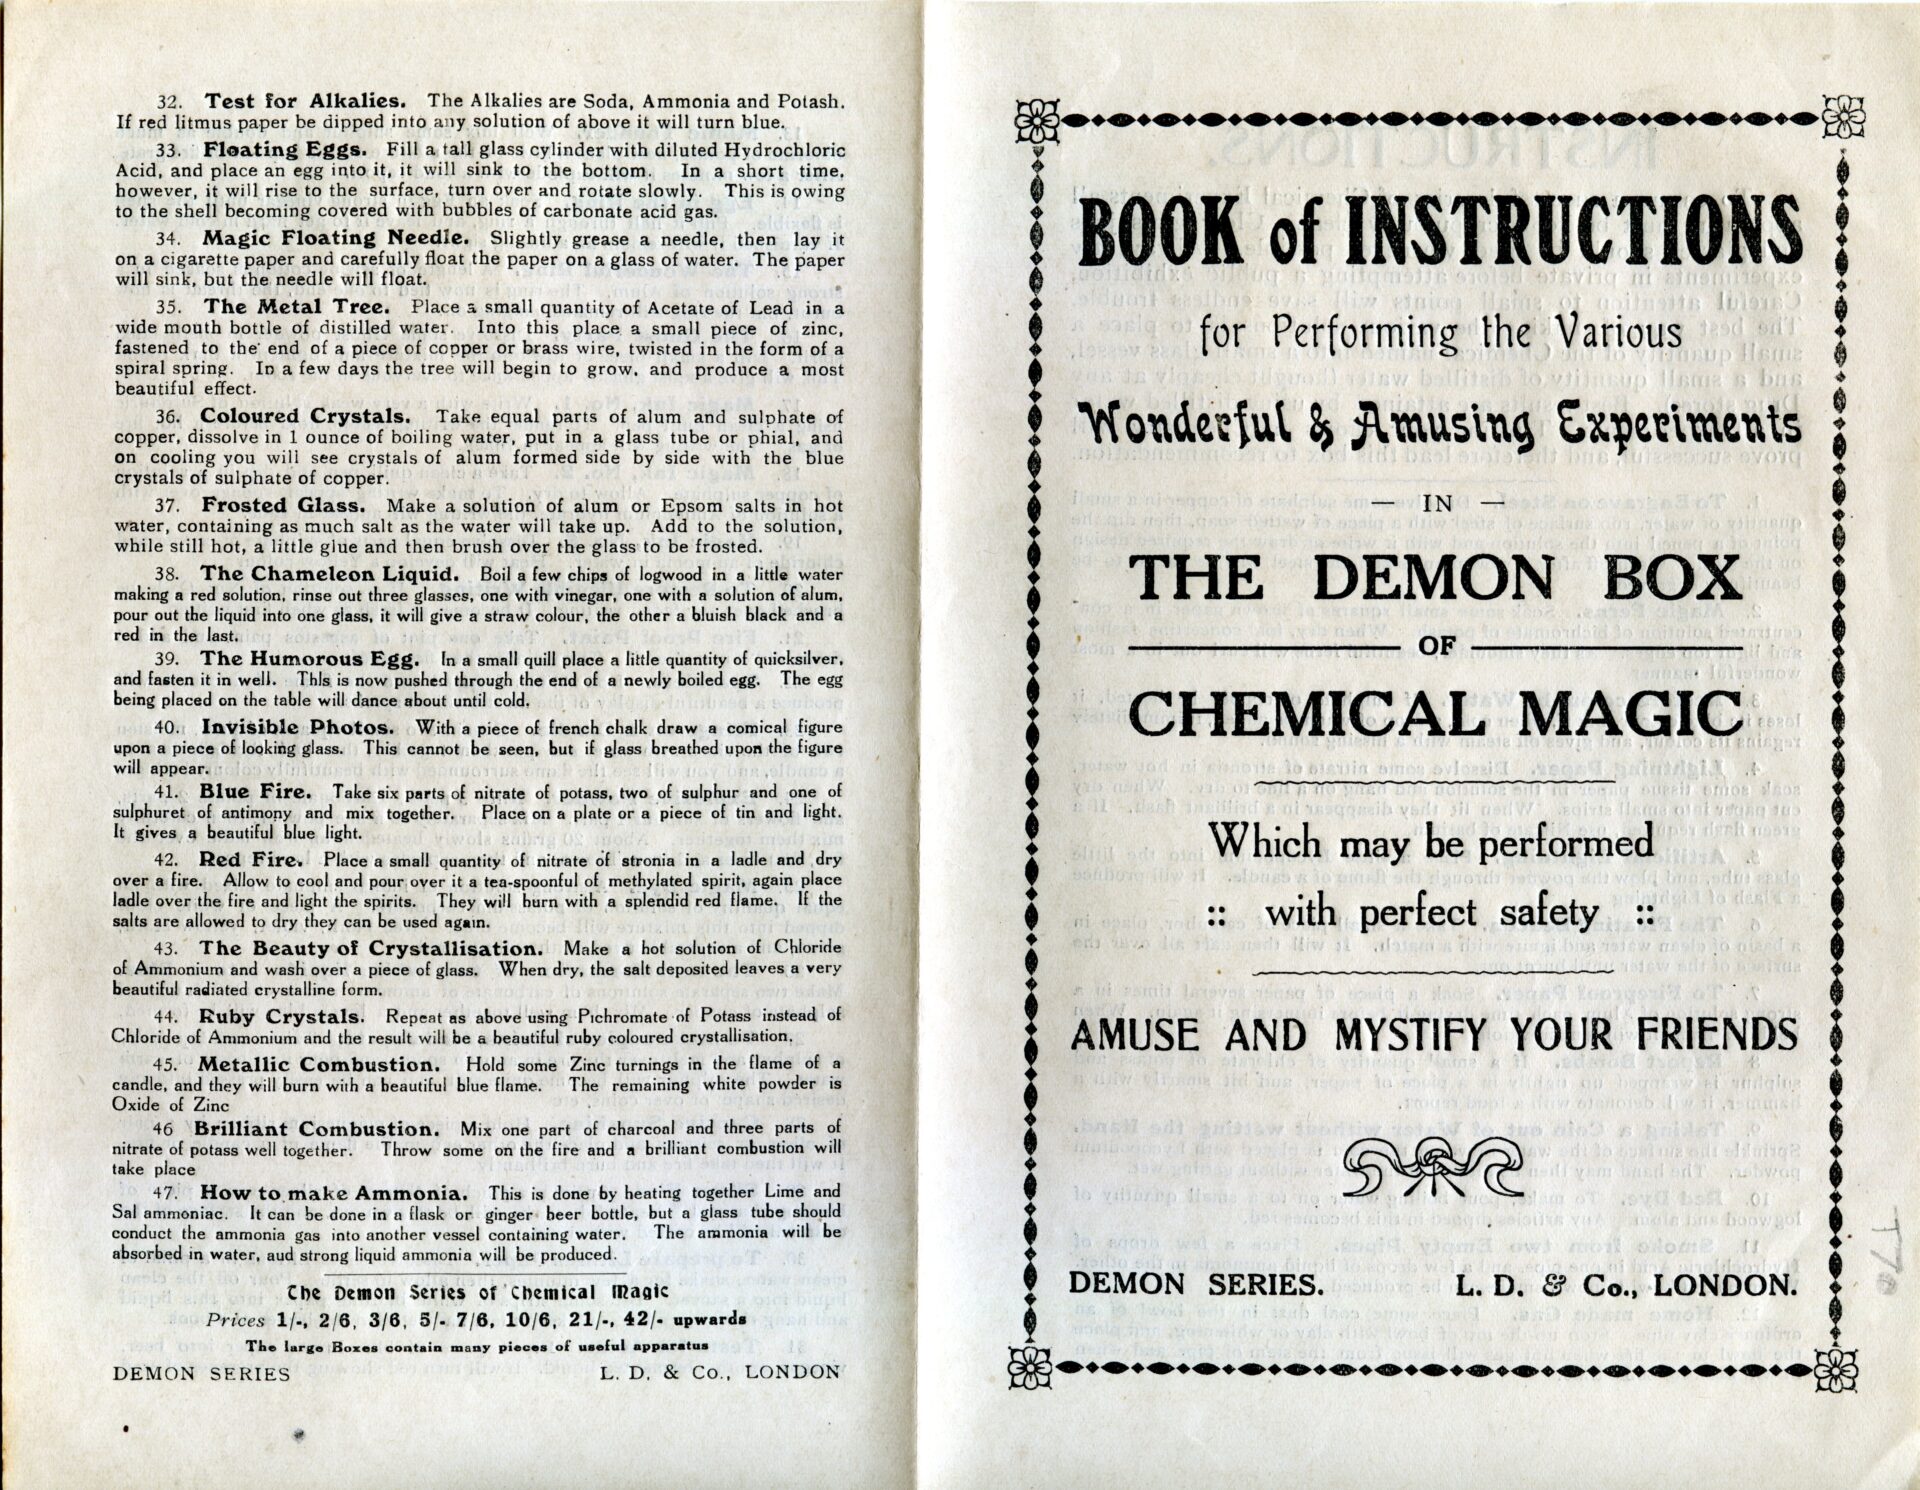 Demon Box of Chemical Magic – instructions only